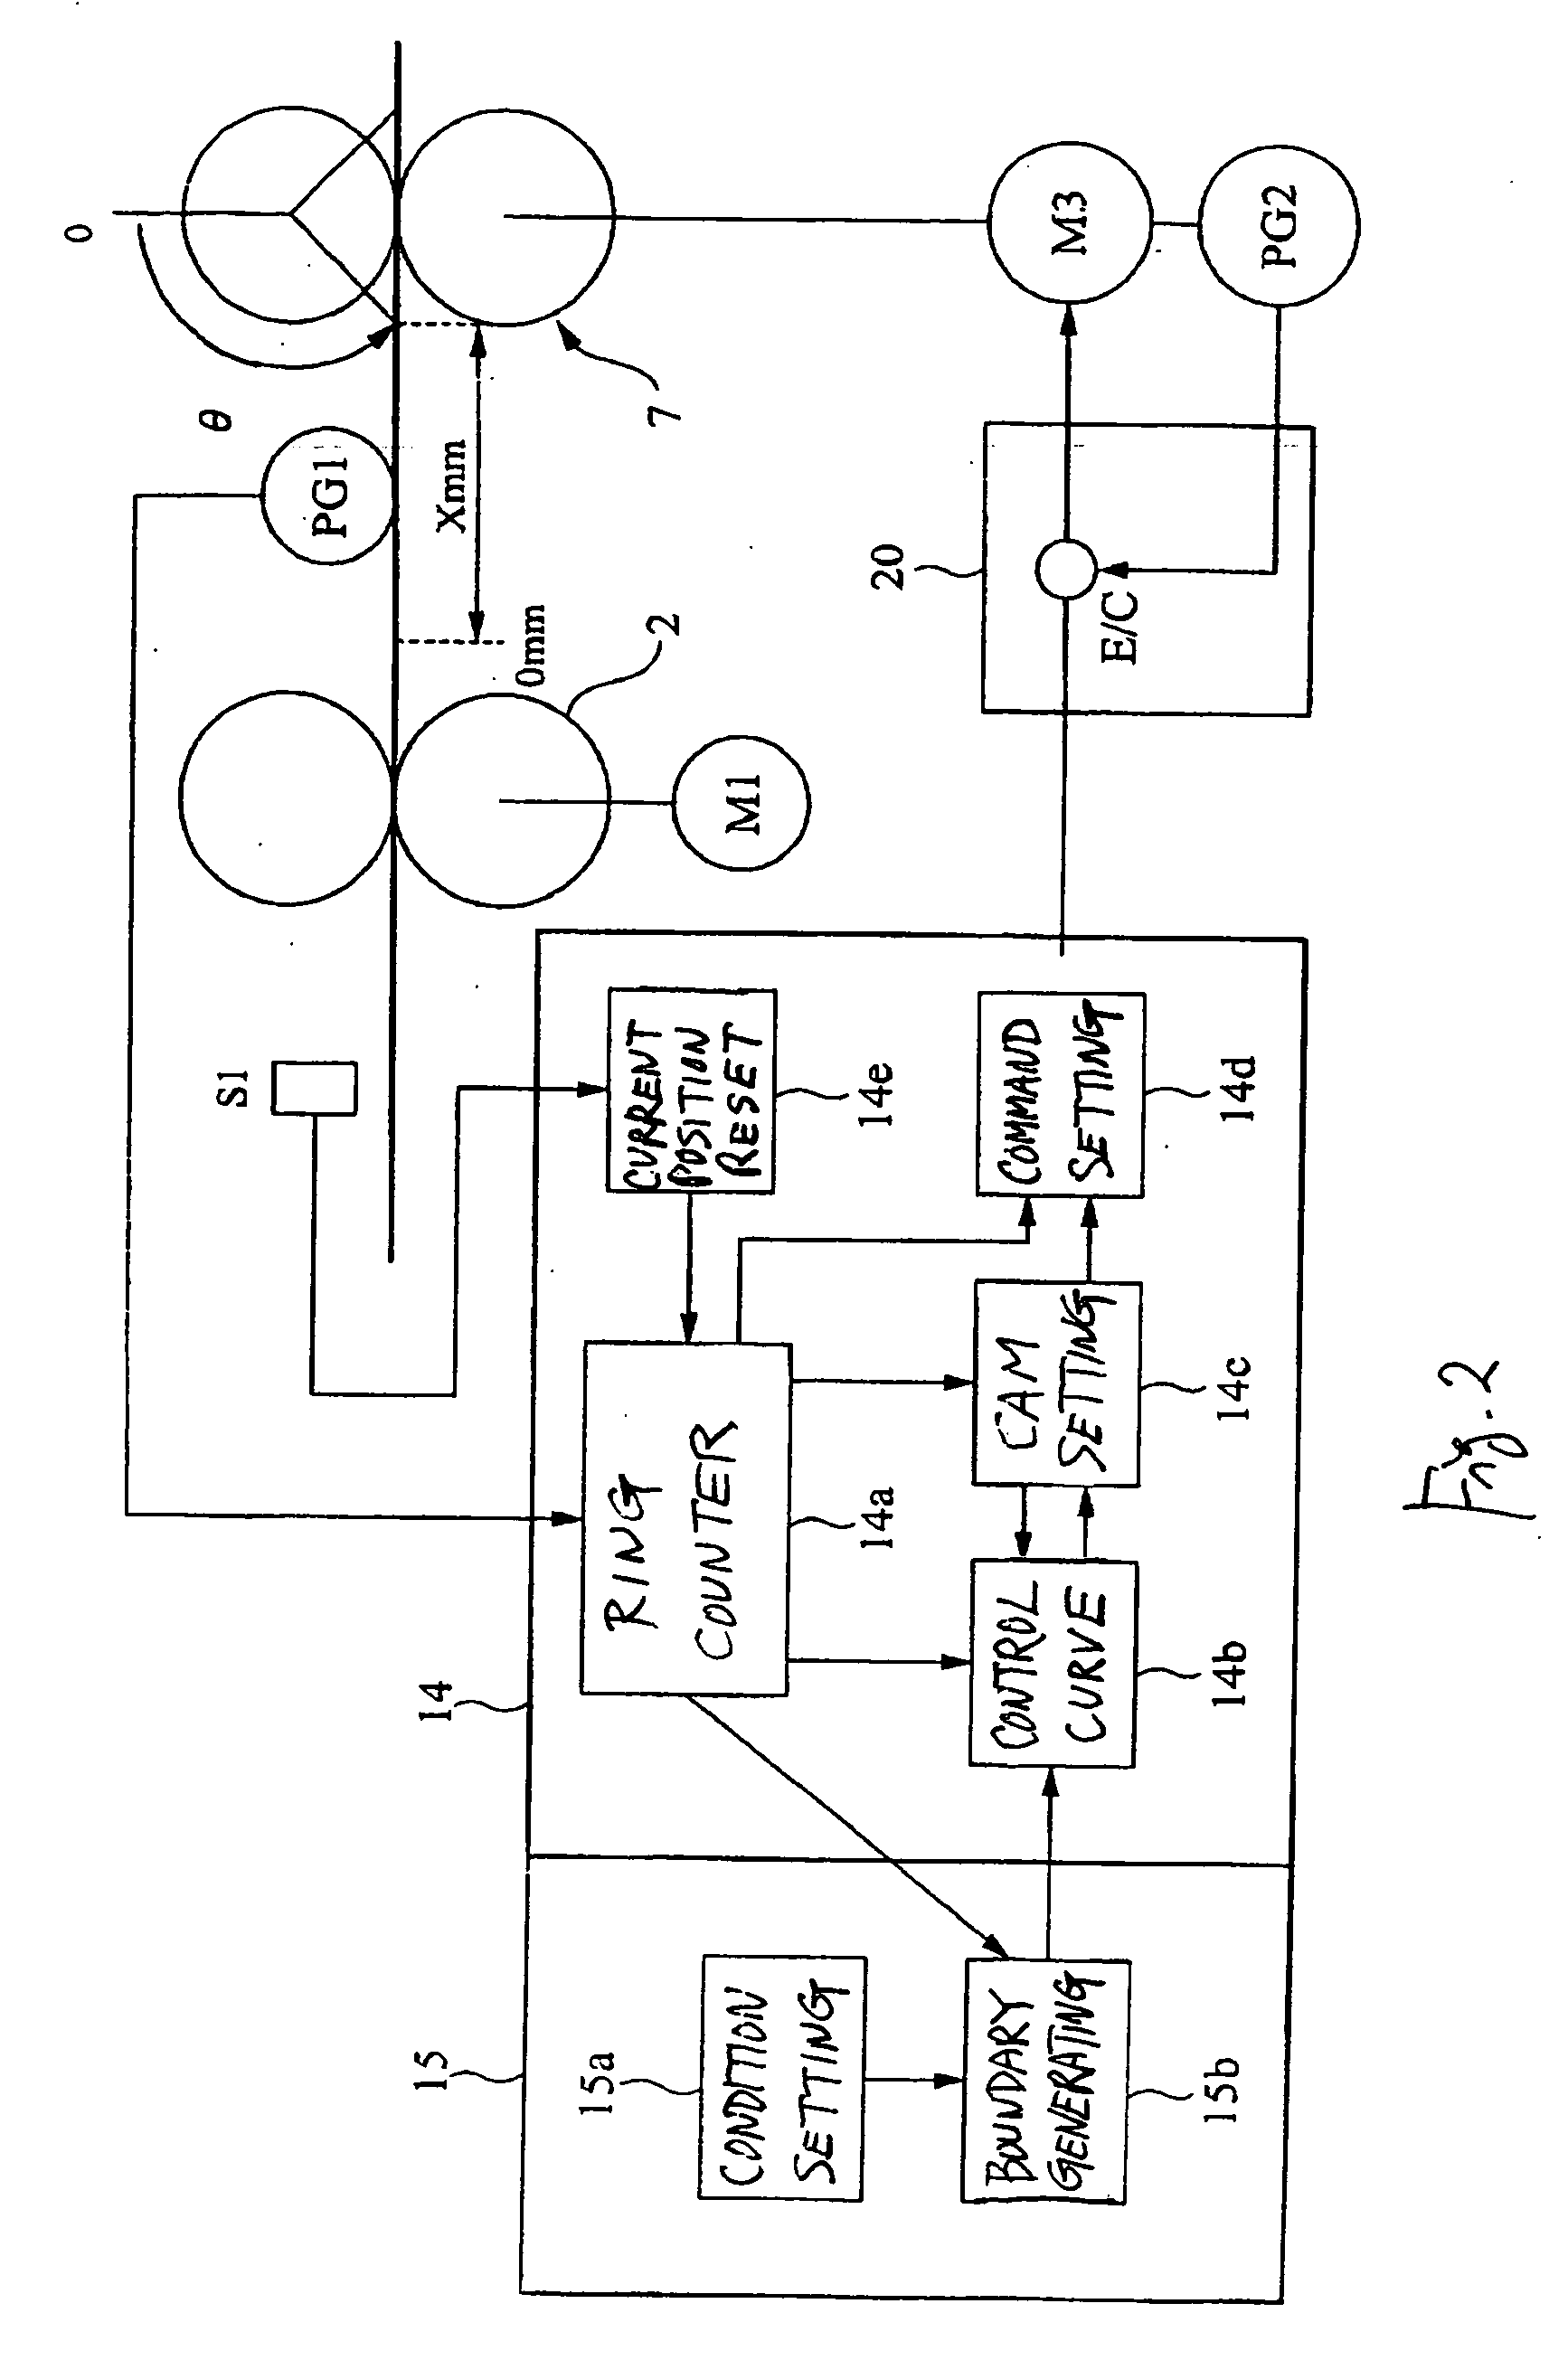 Method of controlling electronic cam and servo motor control system